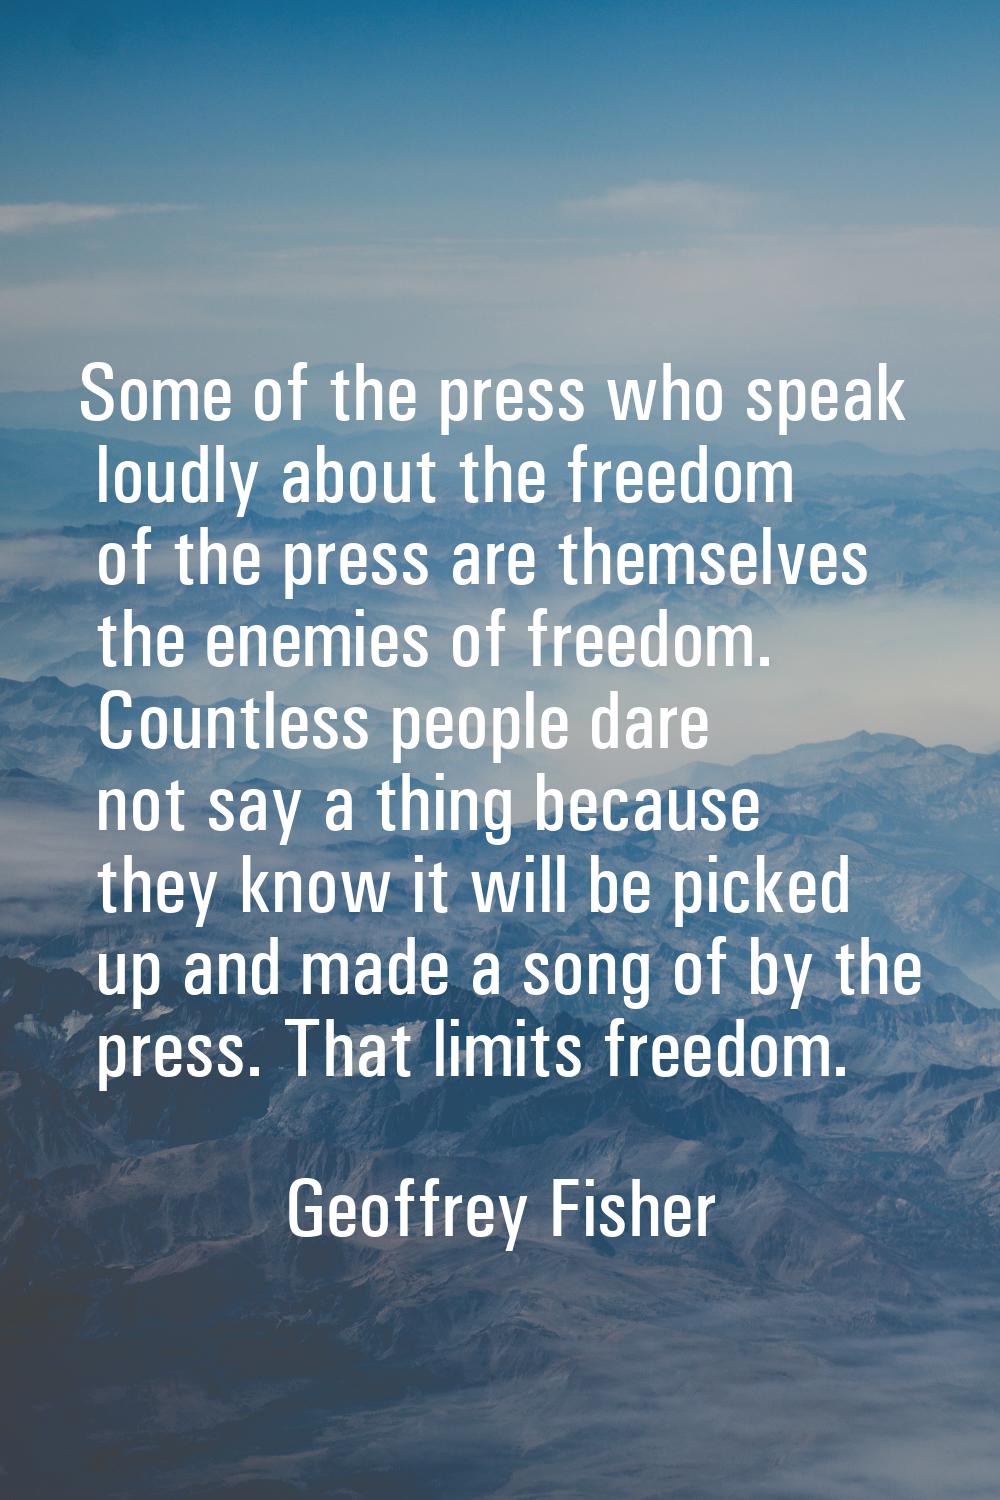 Some of the press who speak loudly about the freedom of the press are themselves the enemies of fre